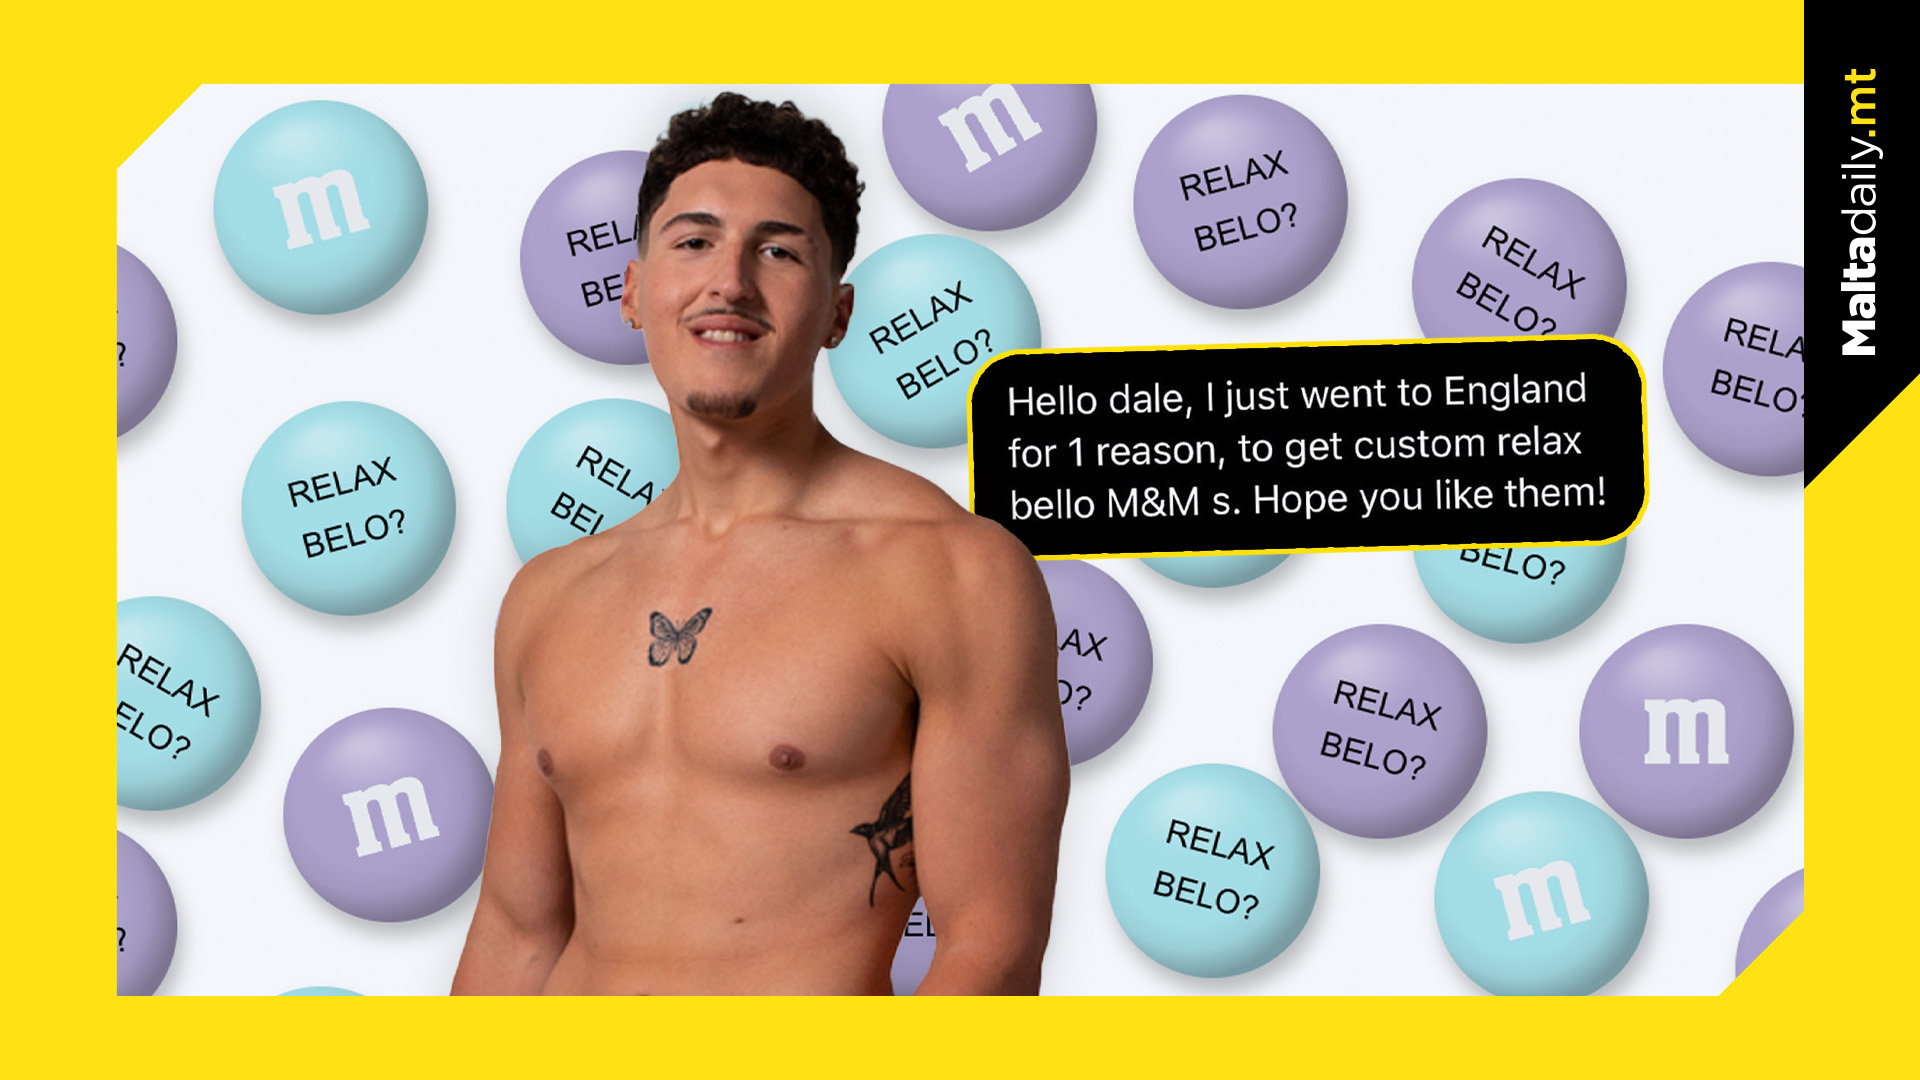 Love Island fan returns from England with custom 'Relax Bello' M&M's